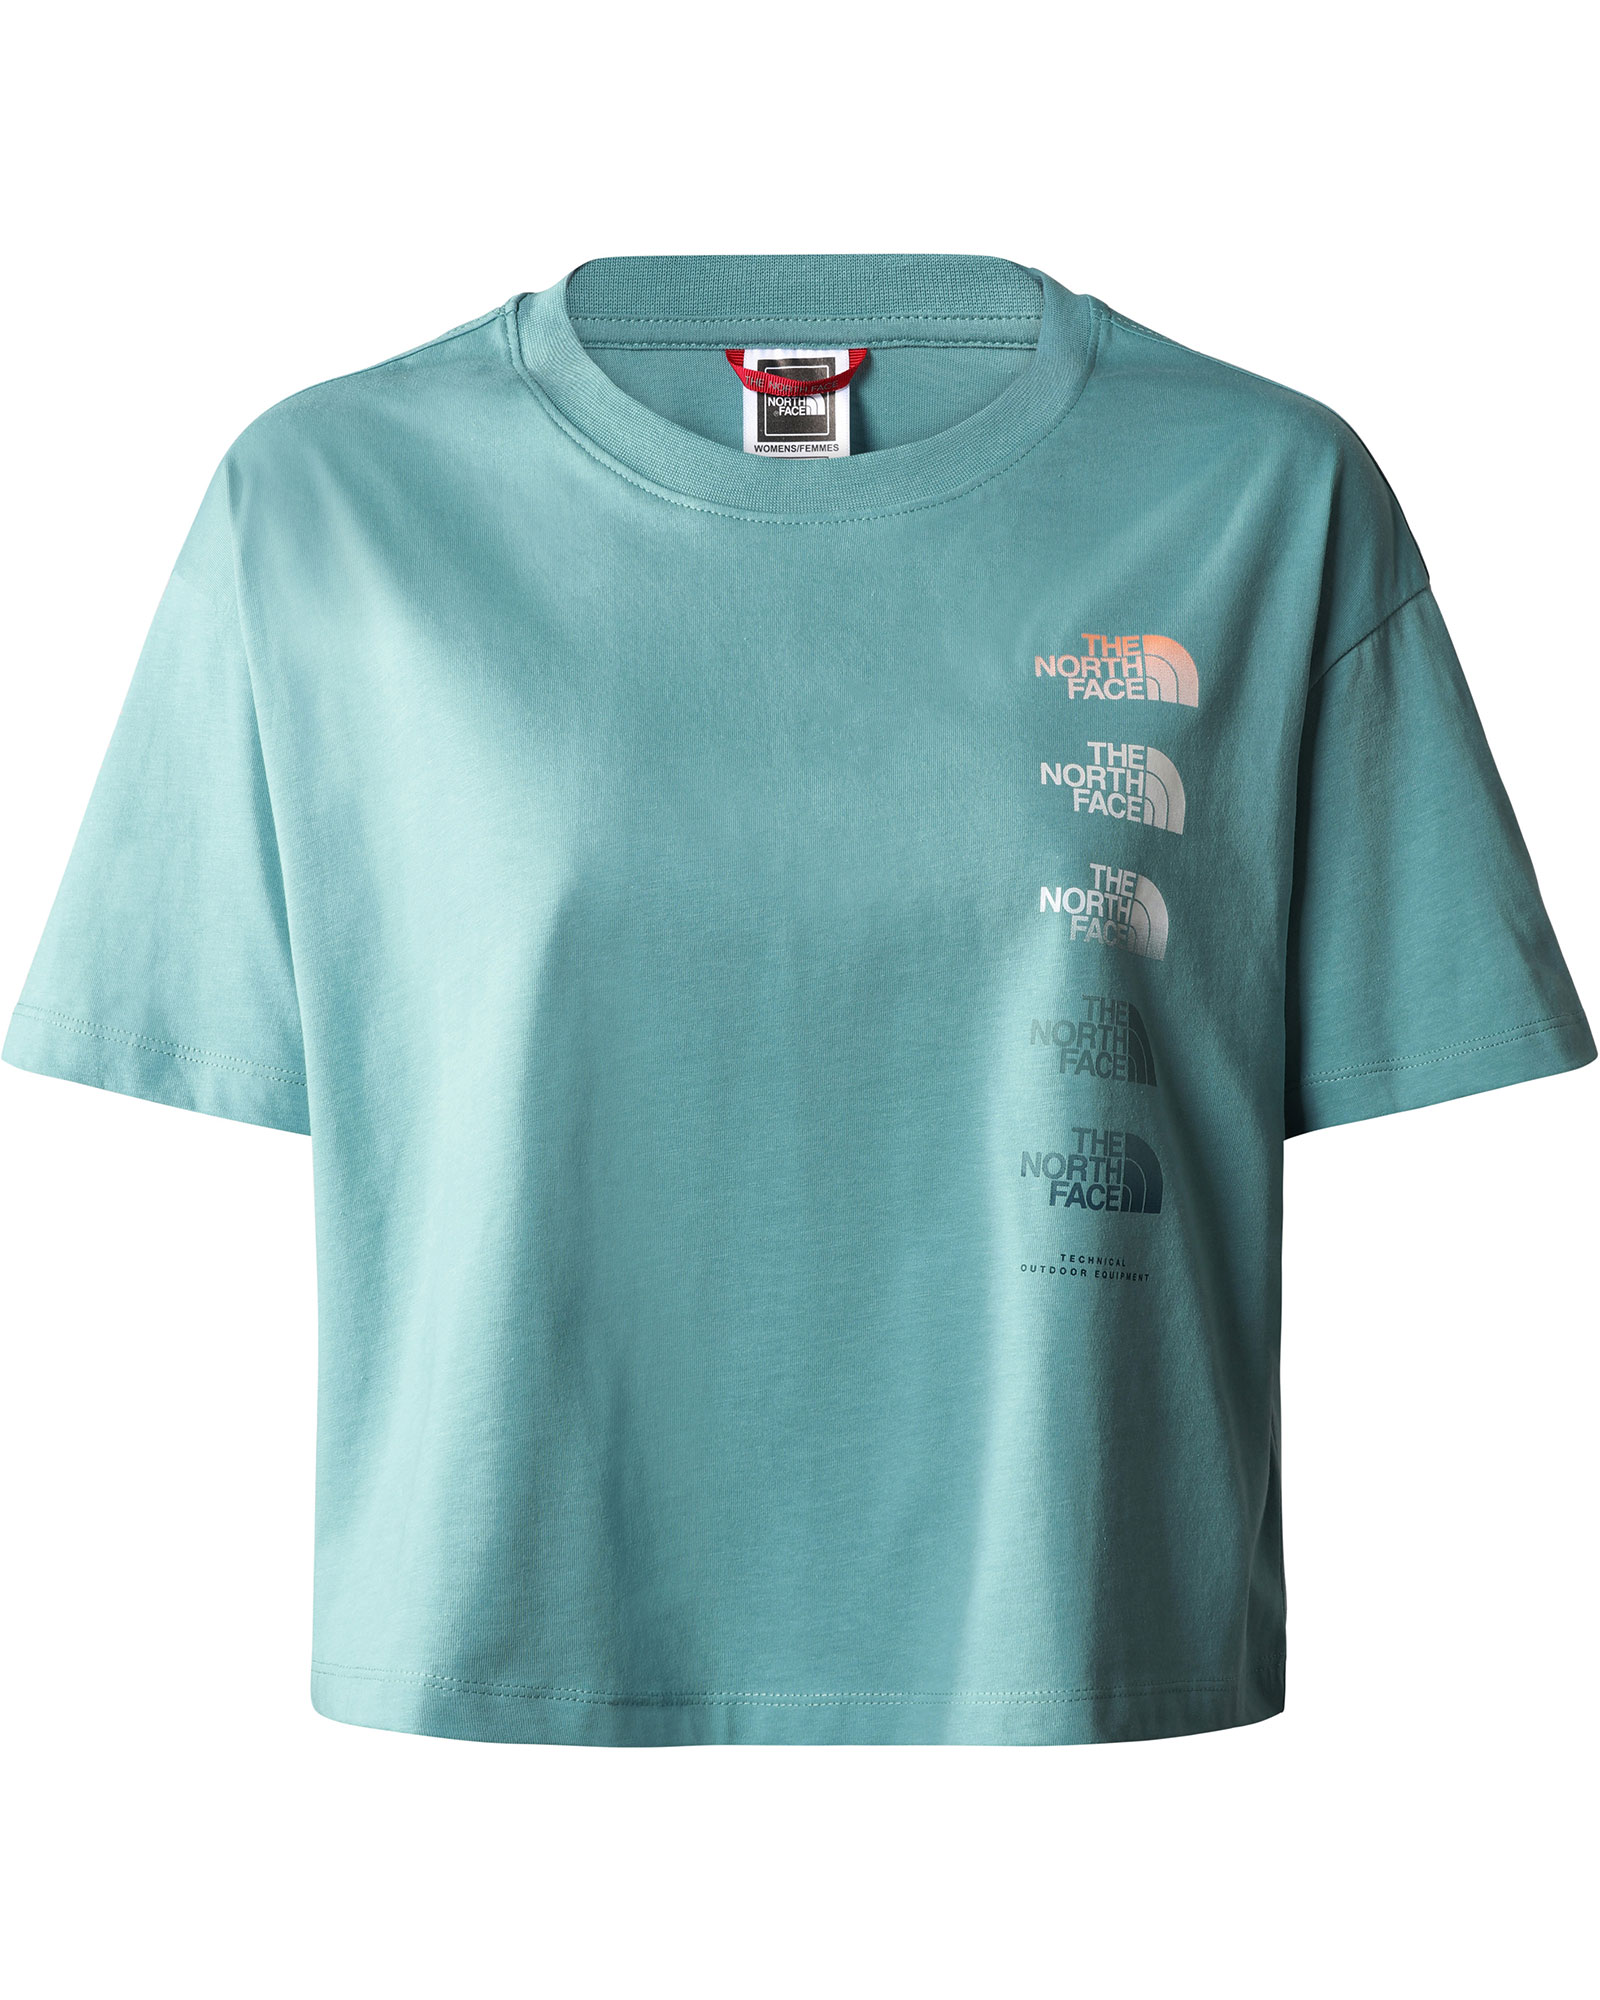 The North Face Women’s D2 Graphic Crop T Shirt - Reef Waters L